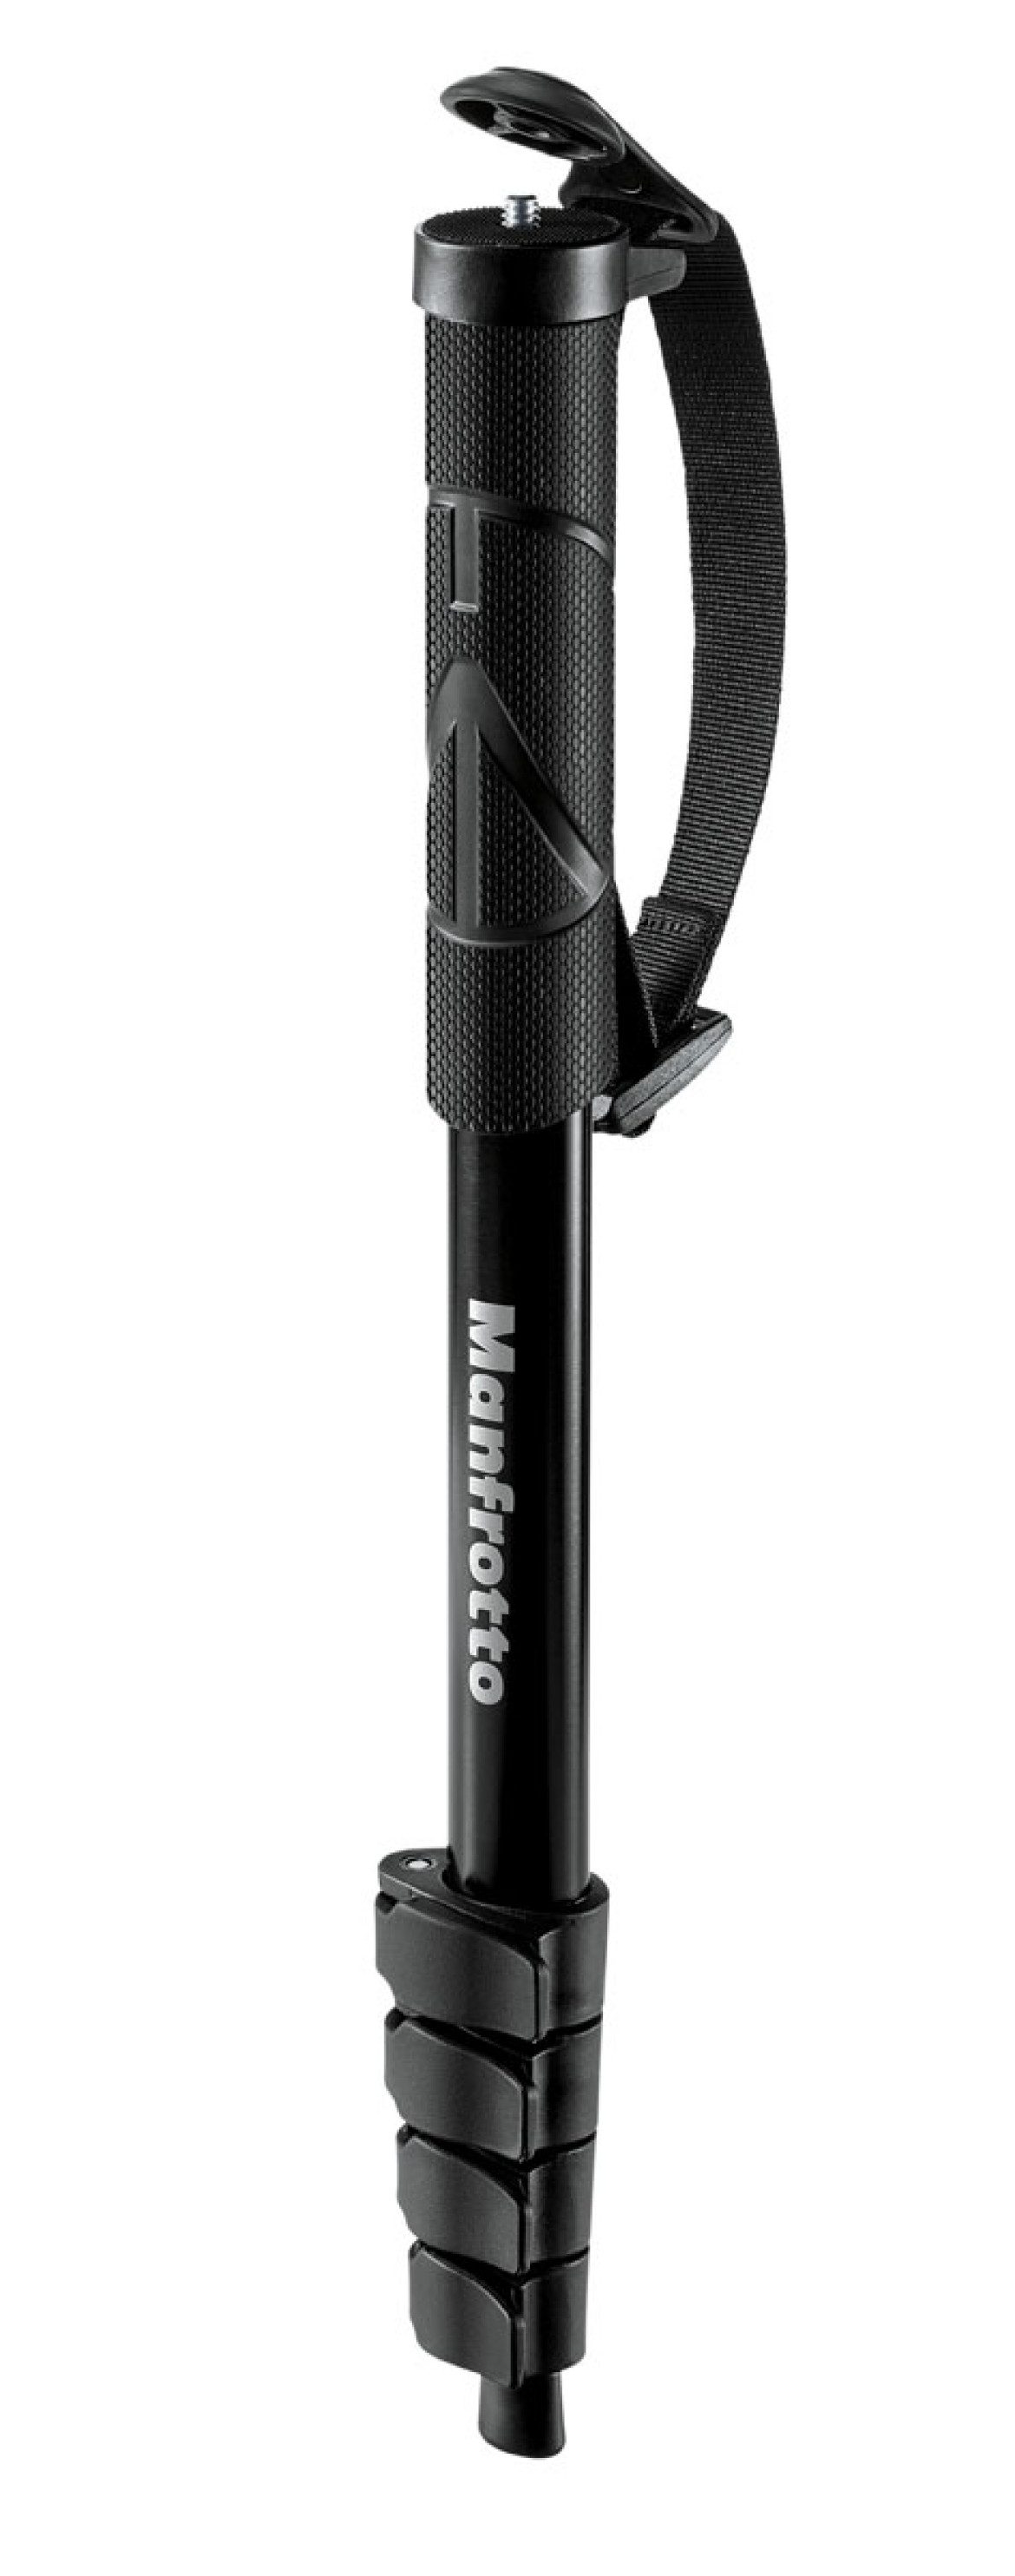 Manfrotto compact